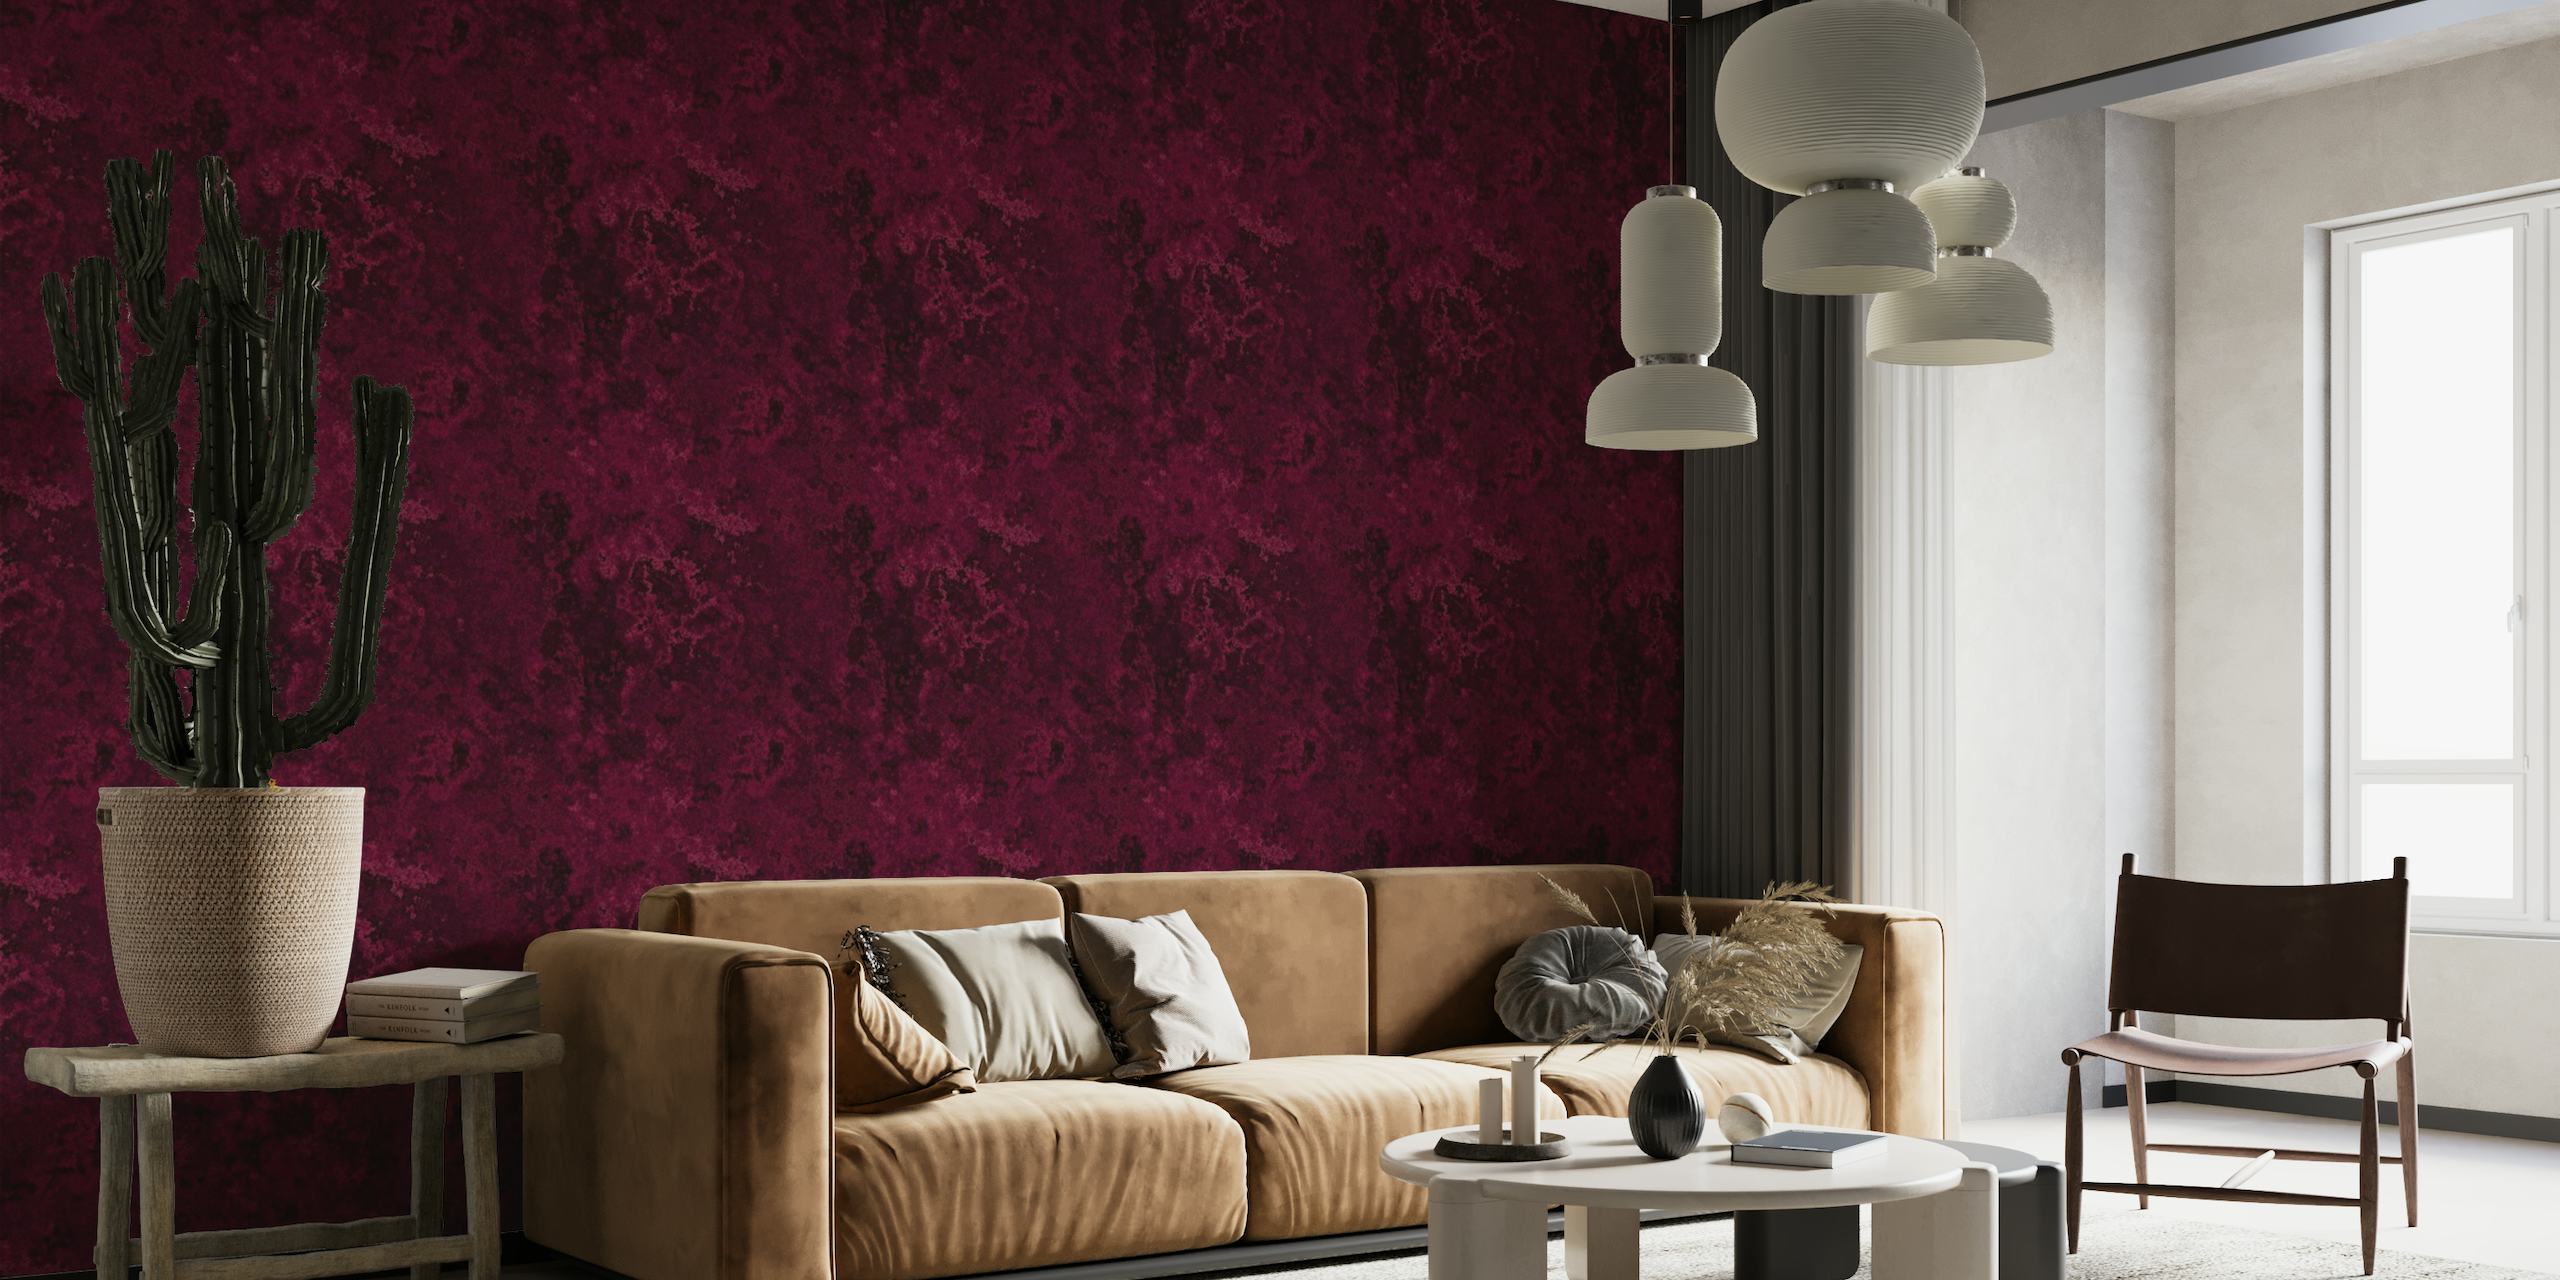 Plain Bright Pink Wallpaper - Thick Textured Feature - Paste The Wall  51115433